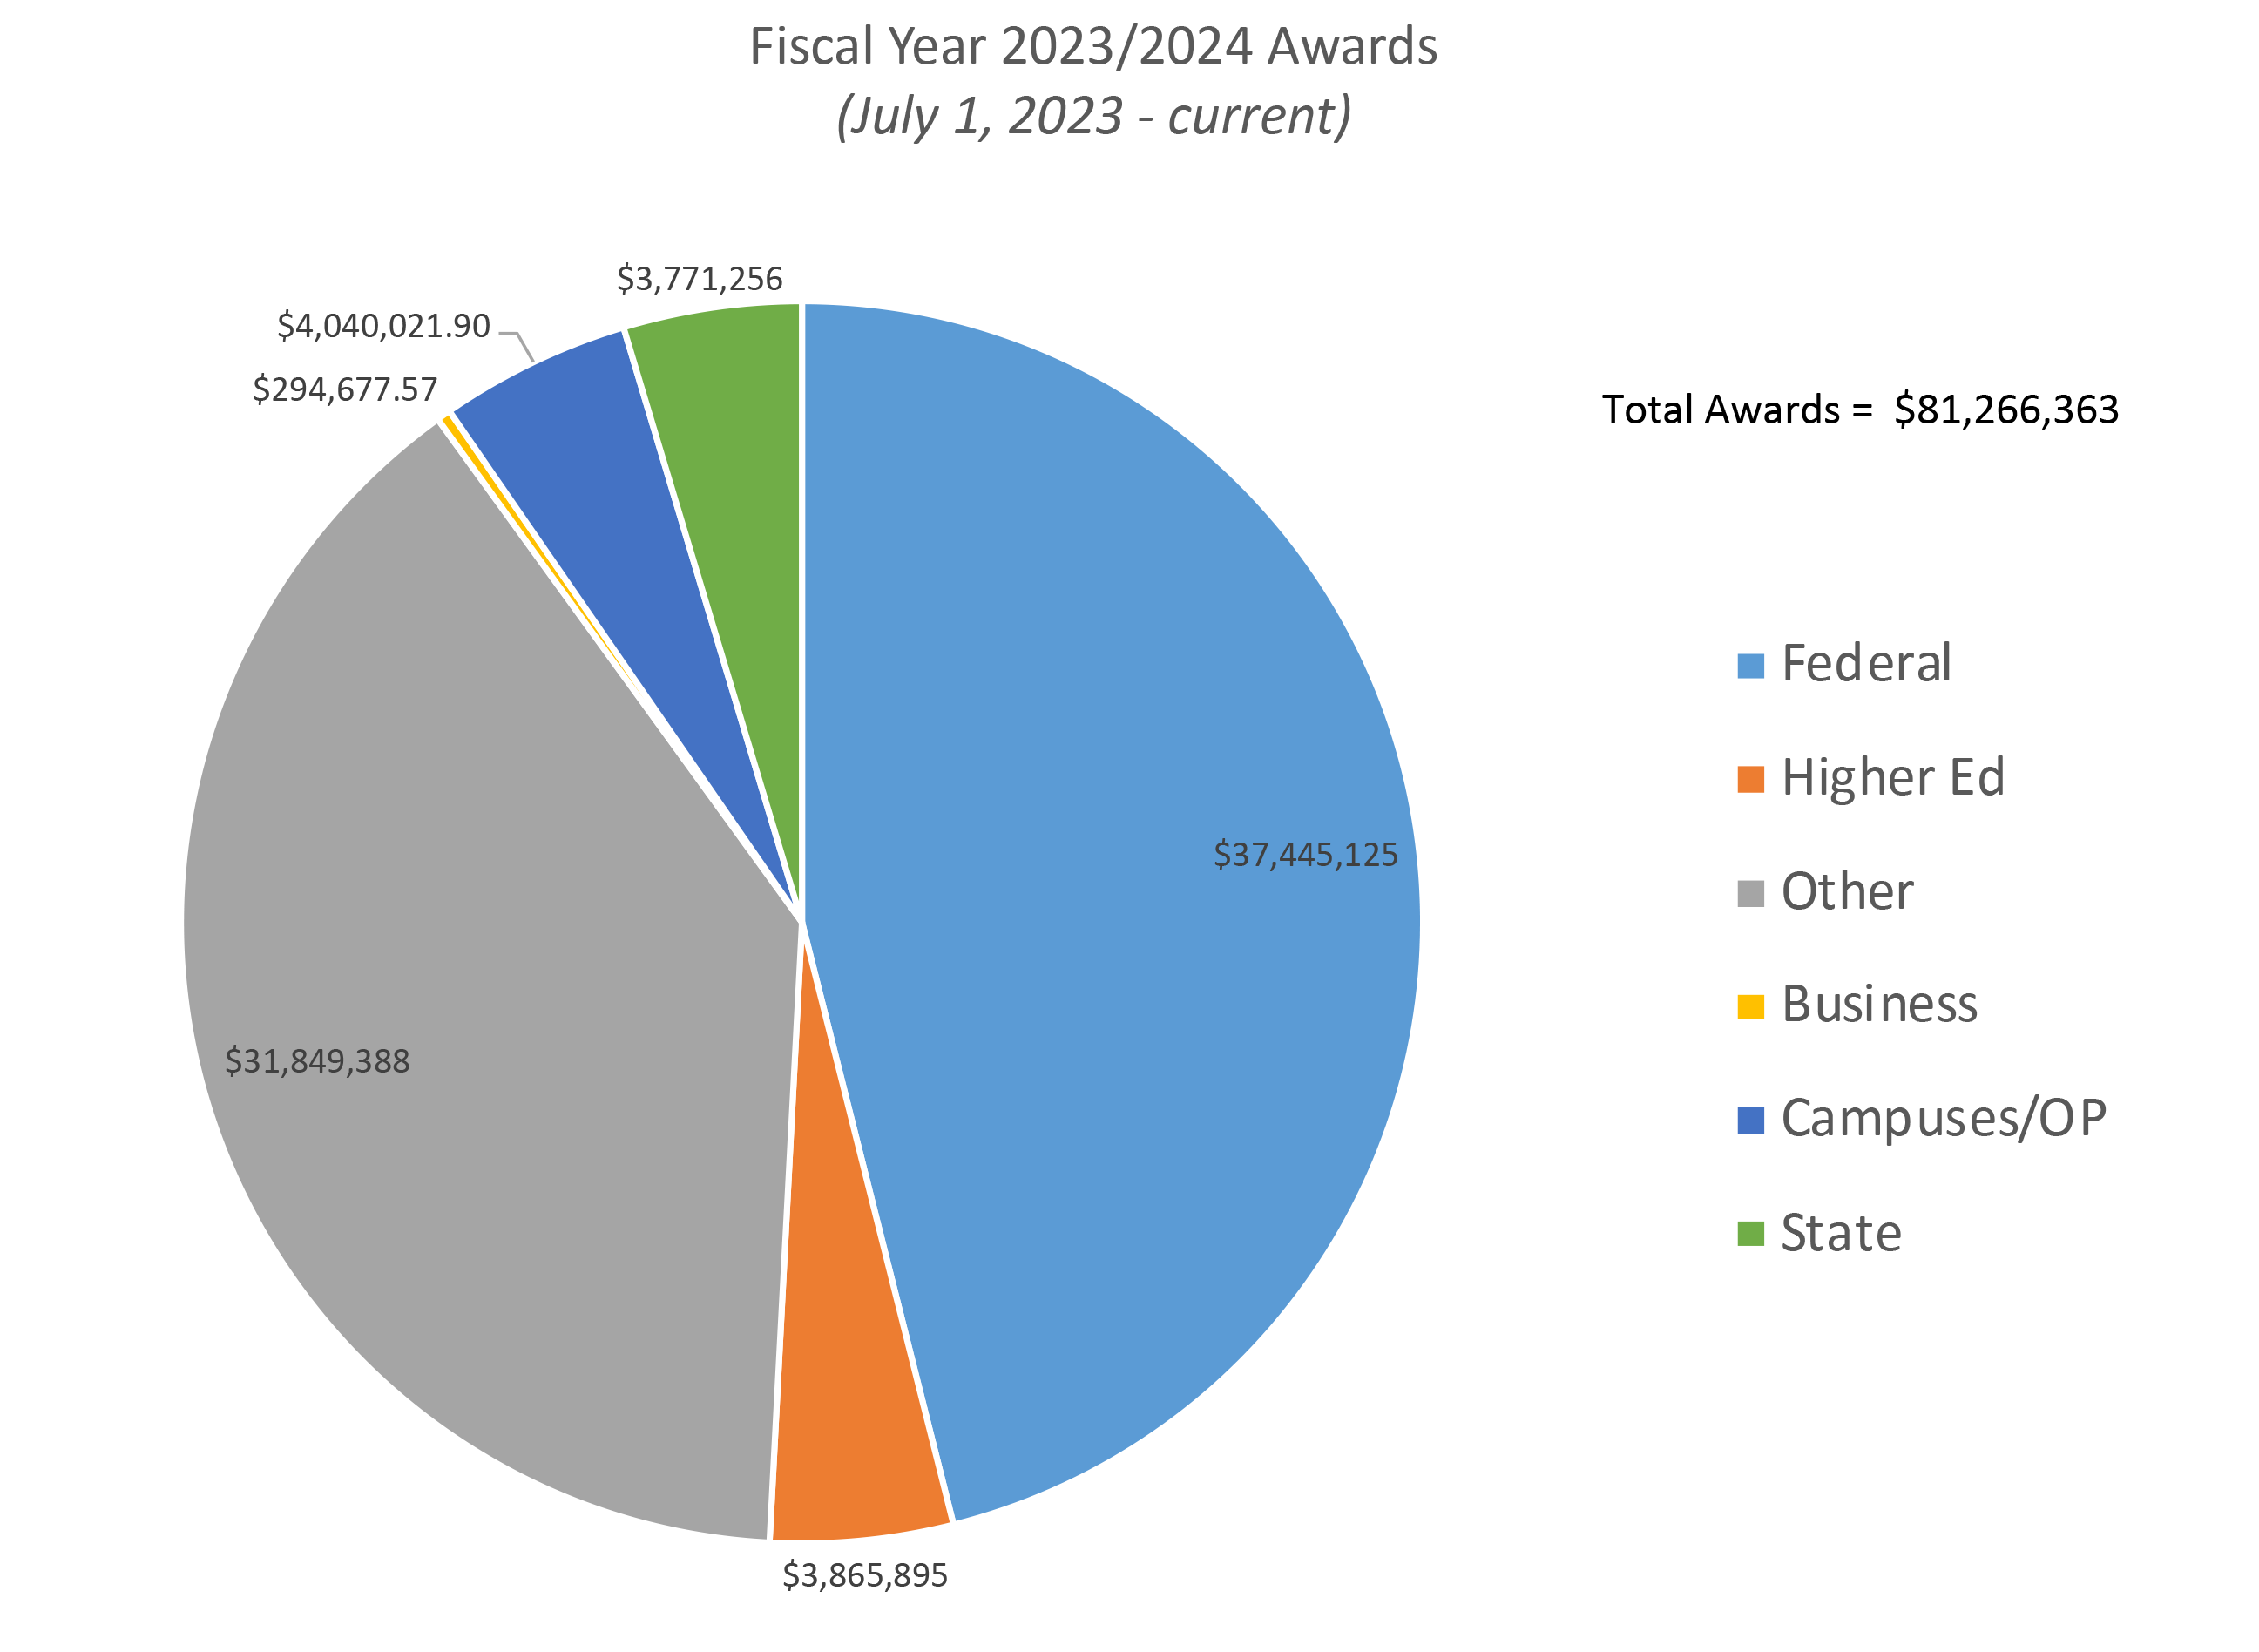 Fiscal Year March 2024 Awards pie chart 